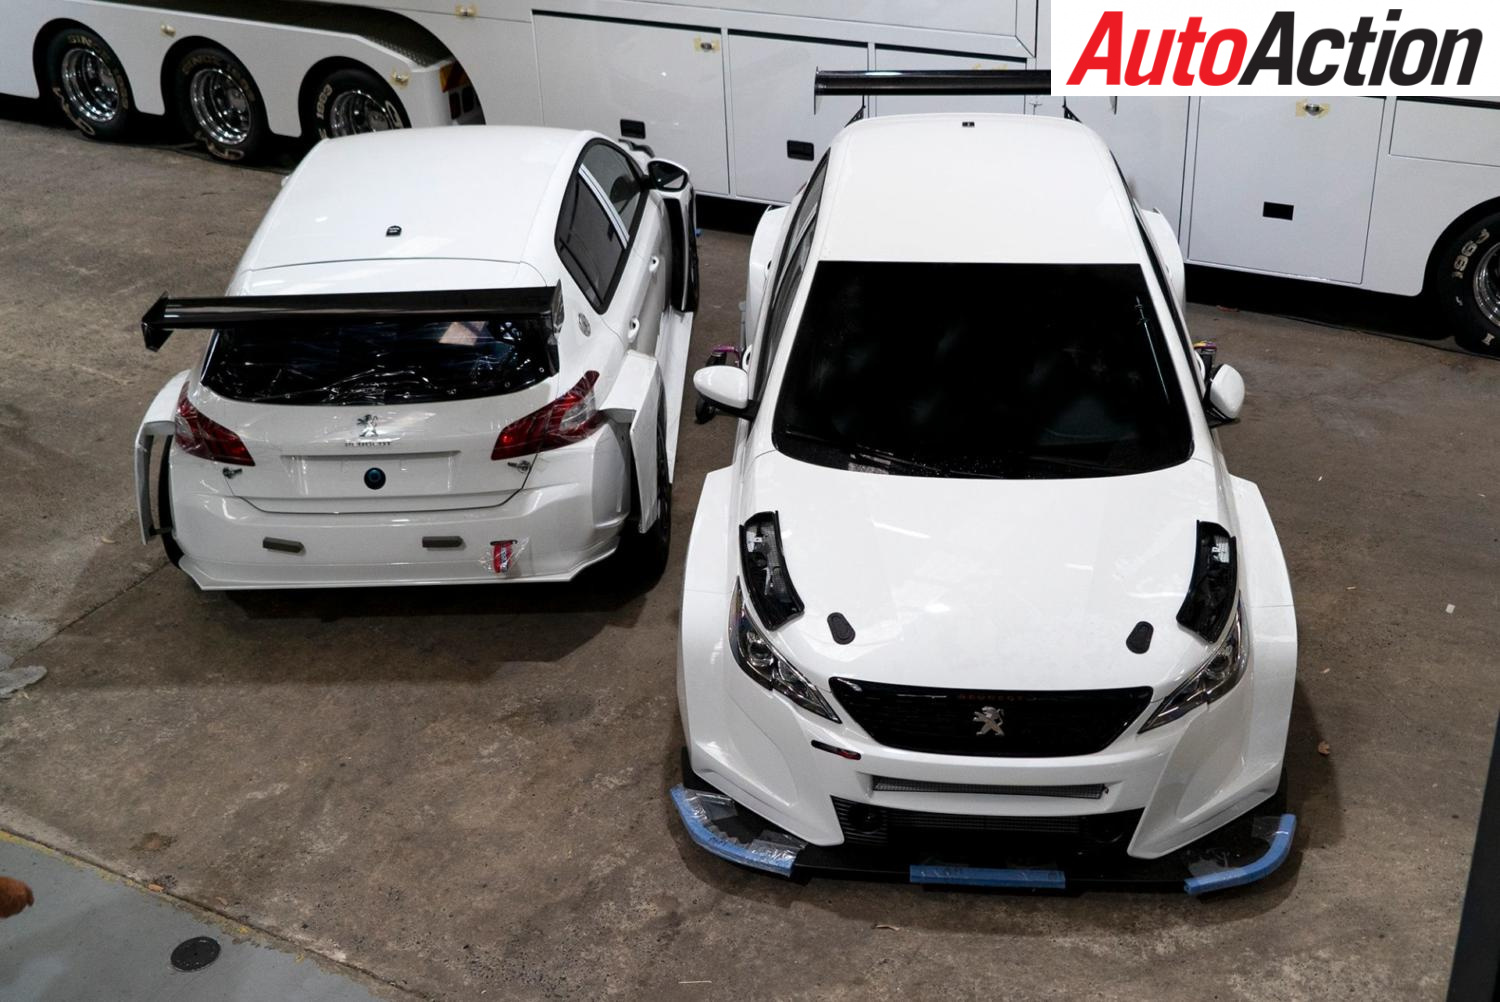 Two new Peugeots arrive at Garry Rogers Motorsport - Photo: Supplied